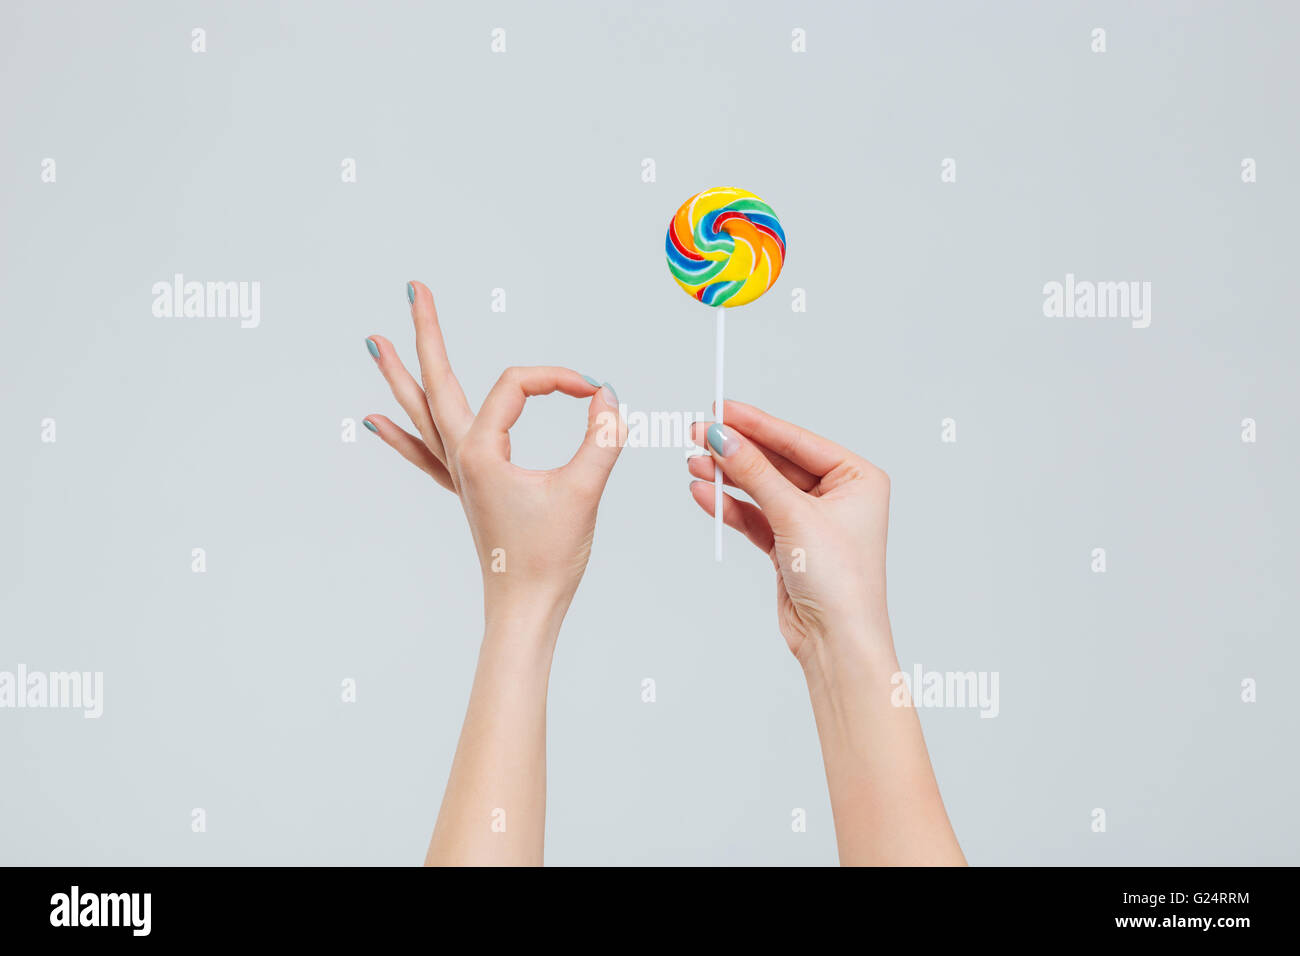 Coseup portrait of female hands holding lollipop and showing ok sign with fingers isolated on a white background Stock Photo